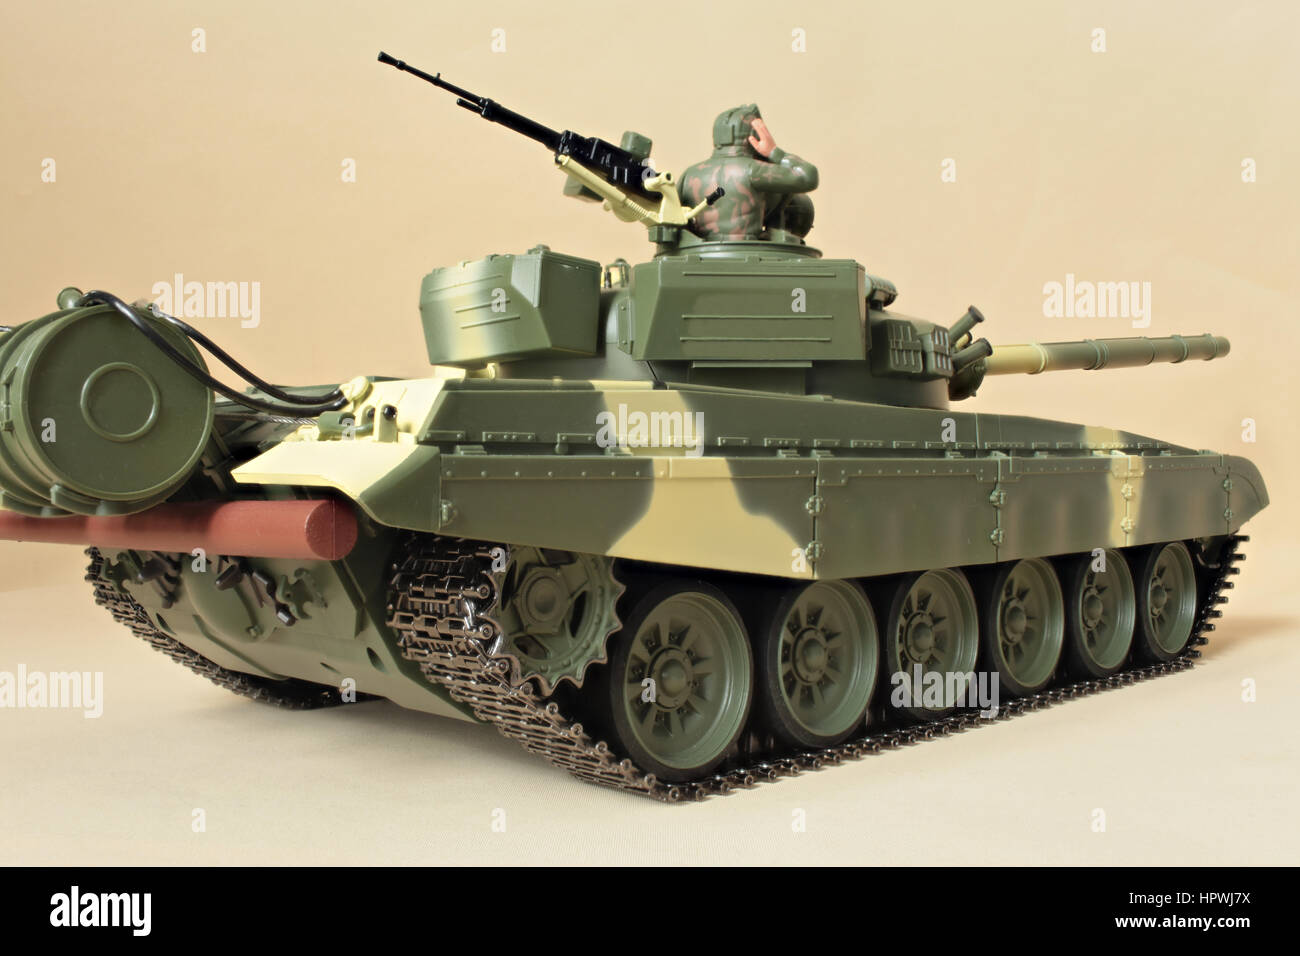 figure commander at Soviet tank T-72 model side rear view, War military attack conflict Stock Photo